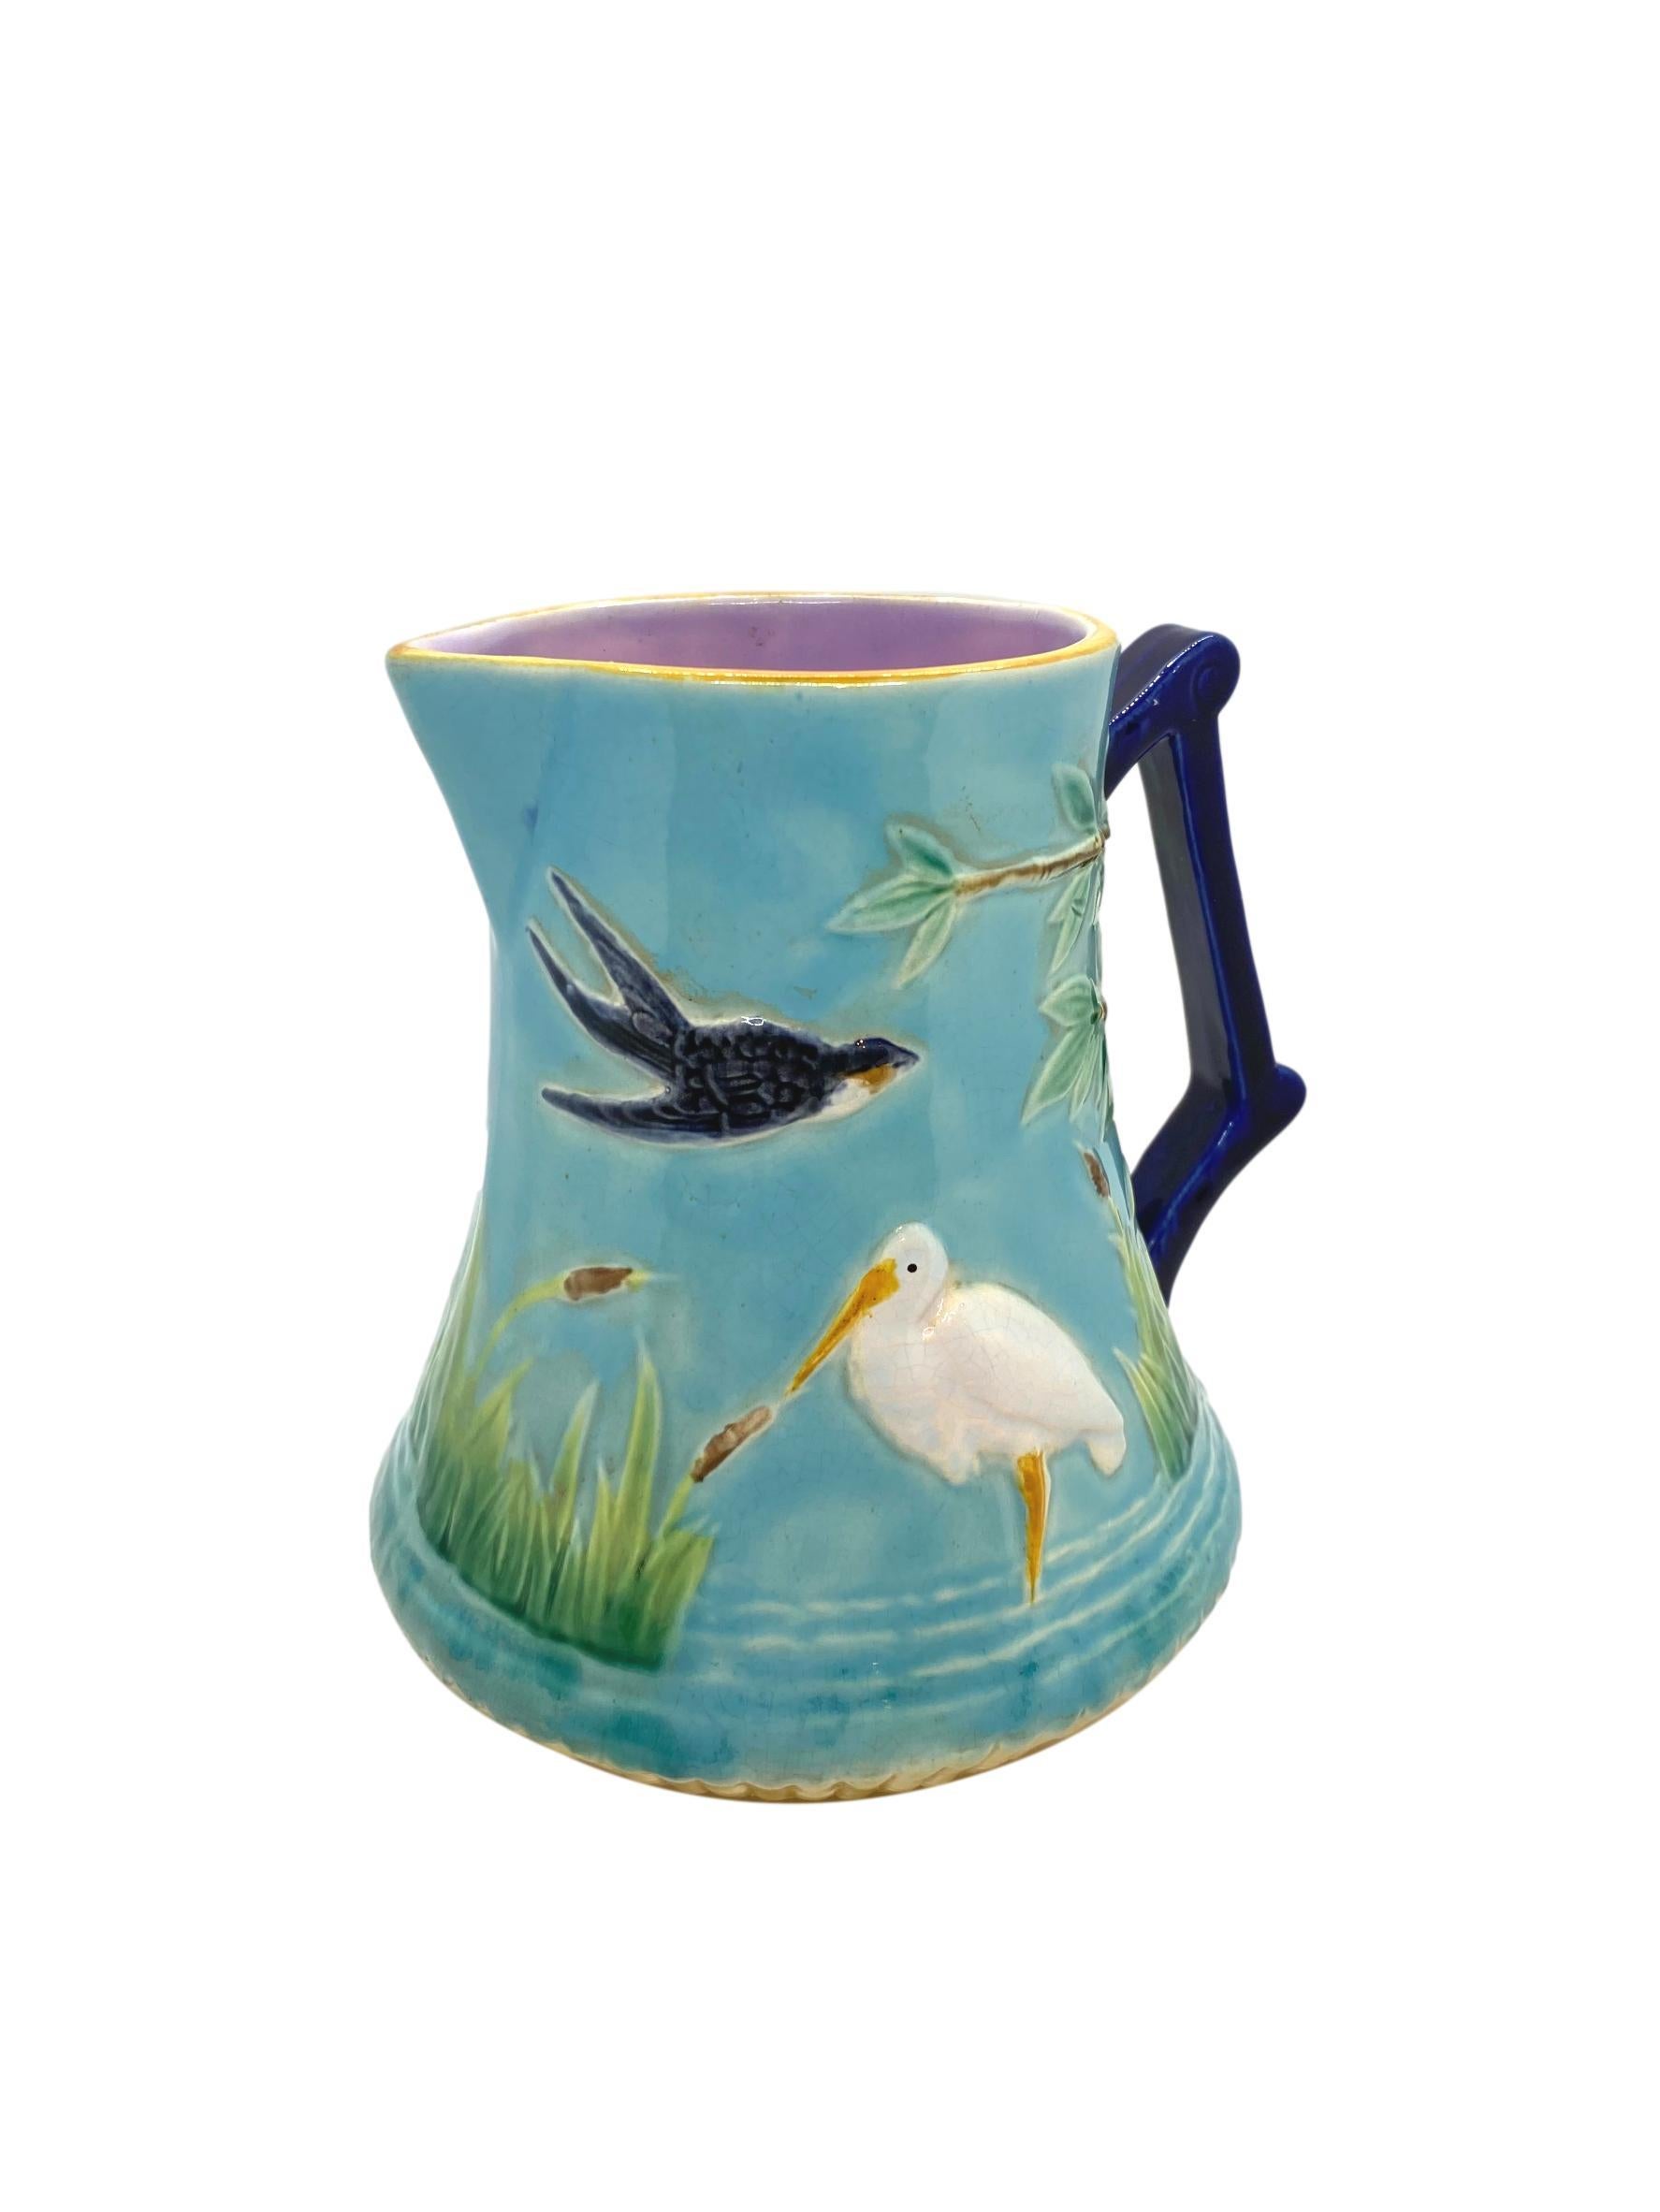 George Jones Majolica Stork in Marsh Pitcher, English, ca. 1878, the relief molded body of tapering cylindrical form, with storks in simulated water among bullrushes and birds to either side, with a tree and branches issuing from under the cobalt